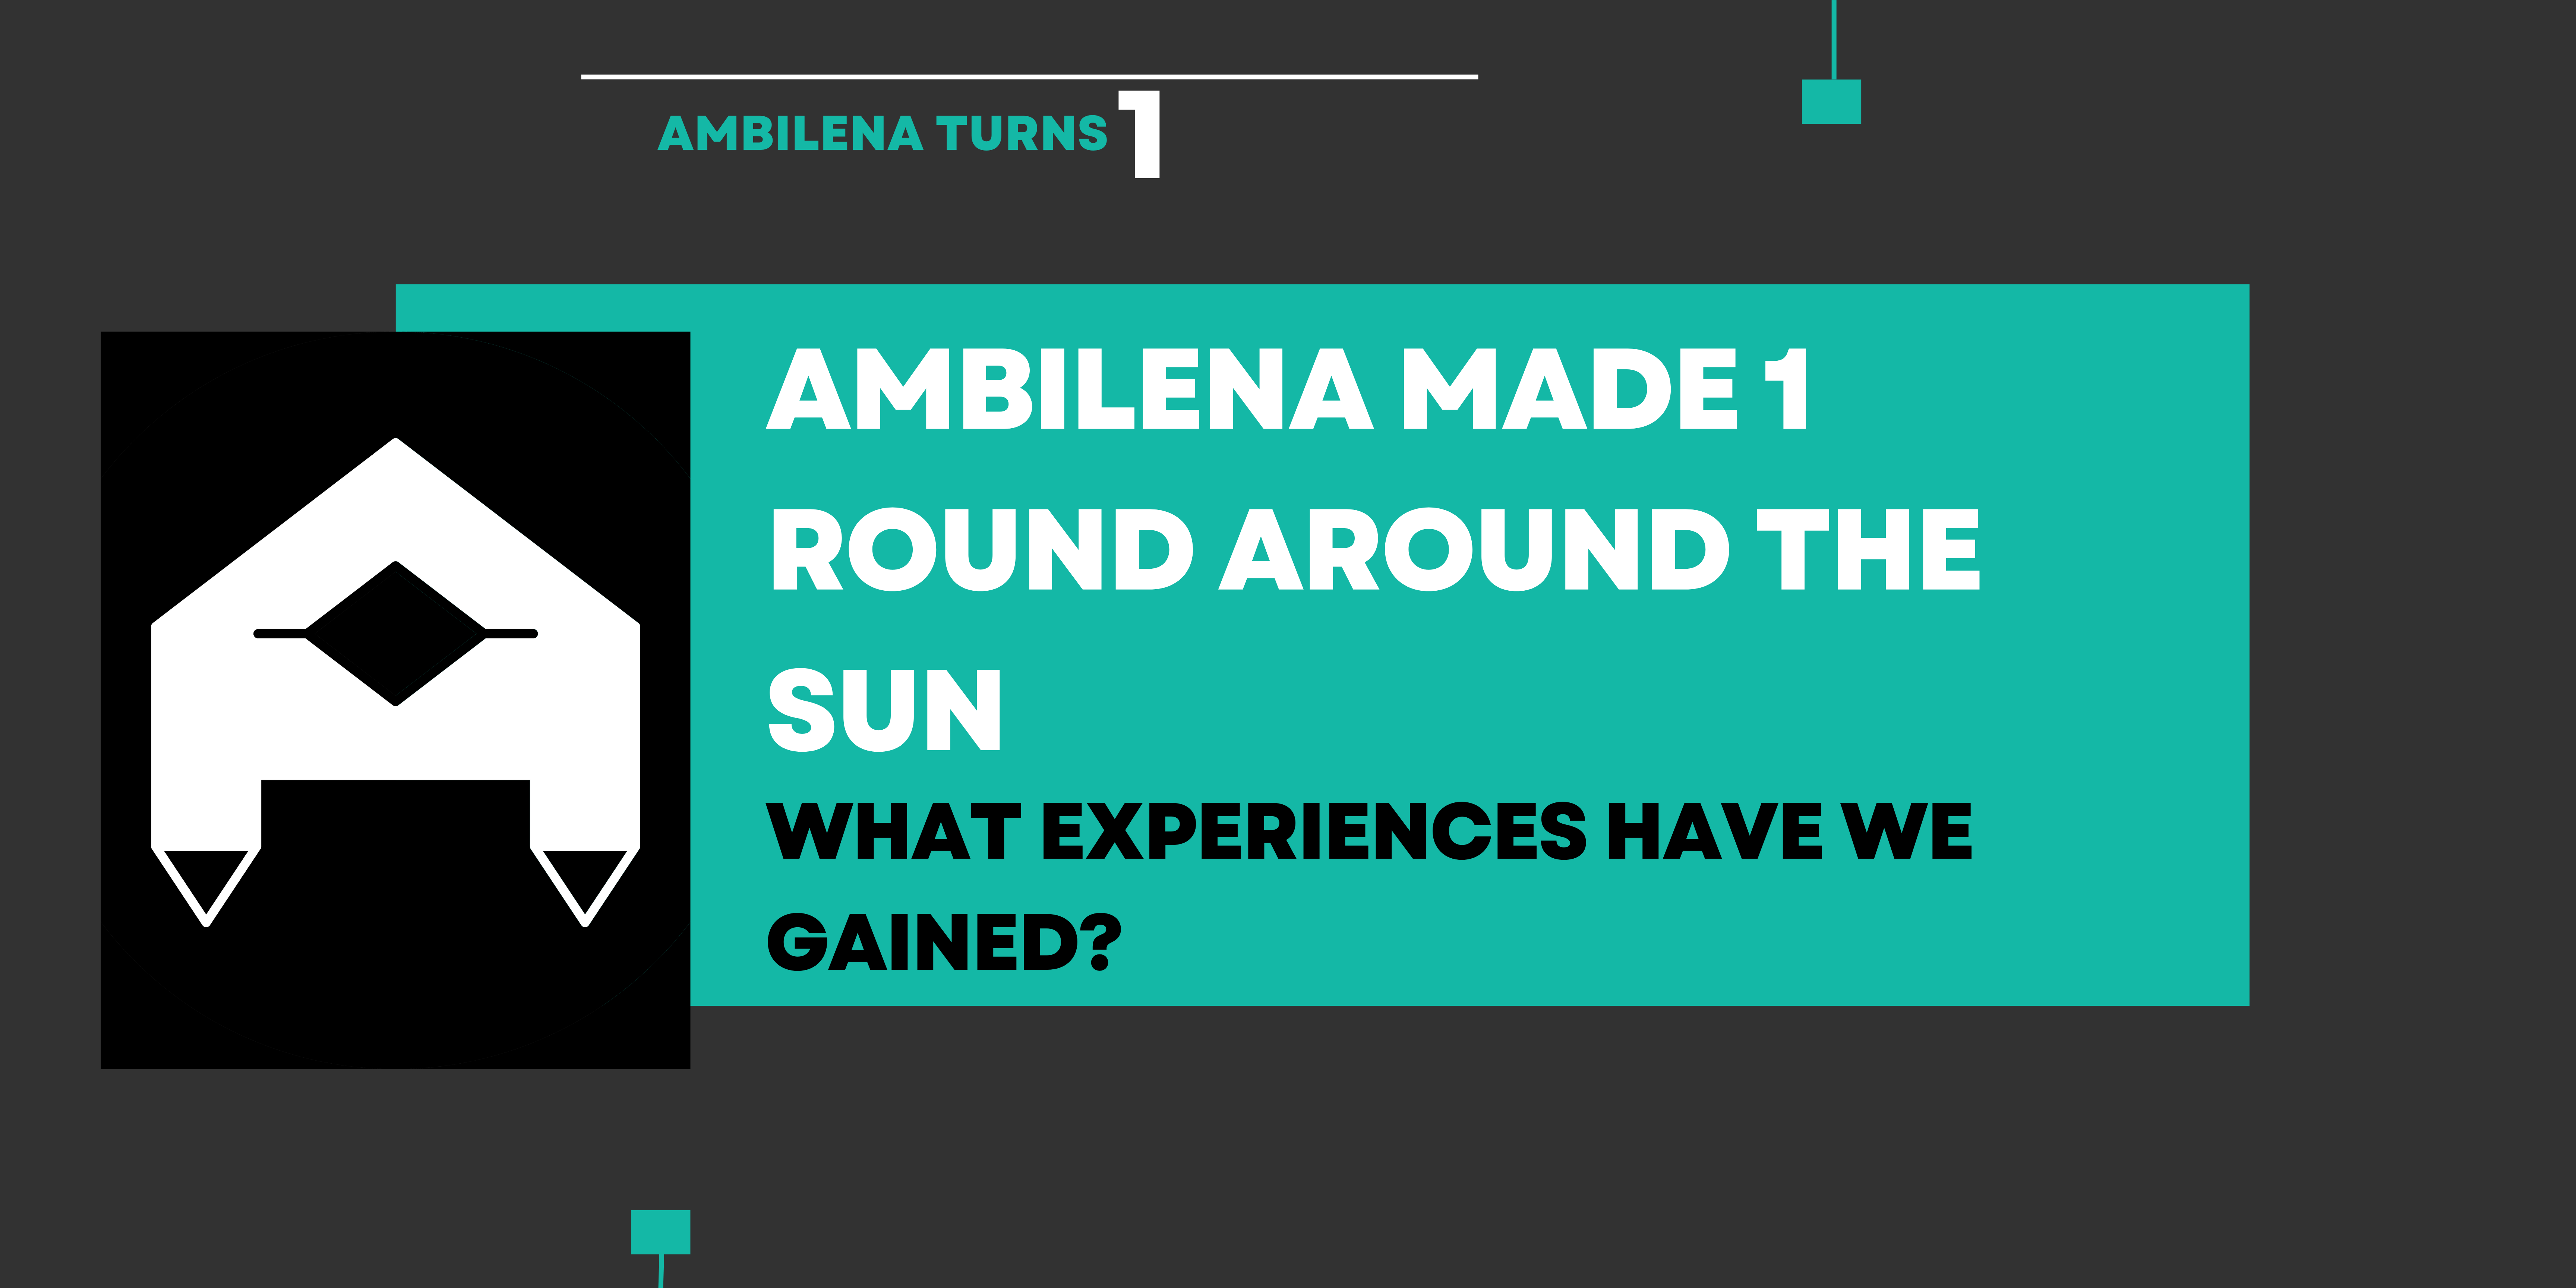 Our Site Made 1 Round Around the Sun - What experiences have we gained?